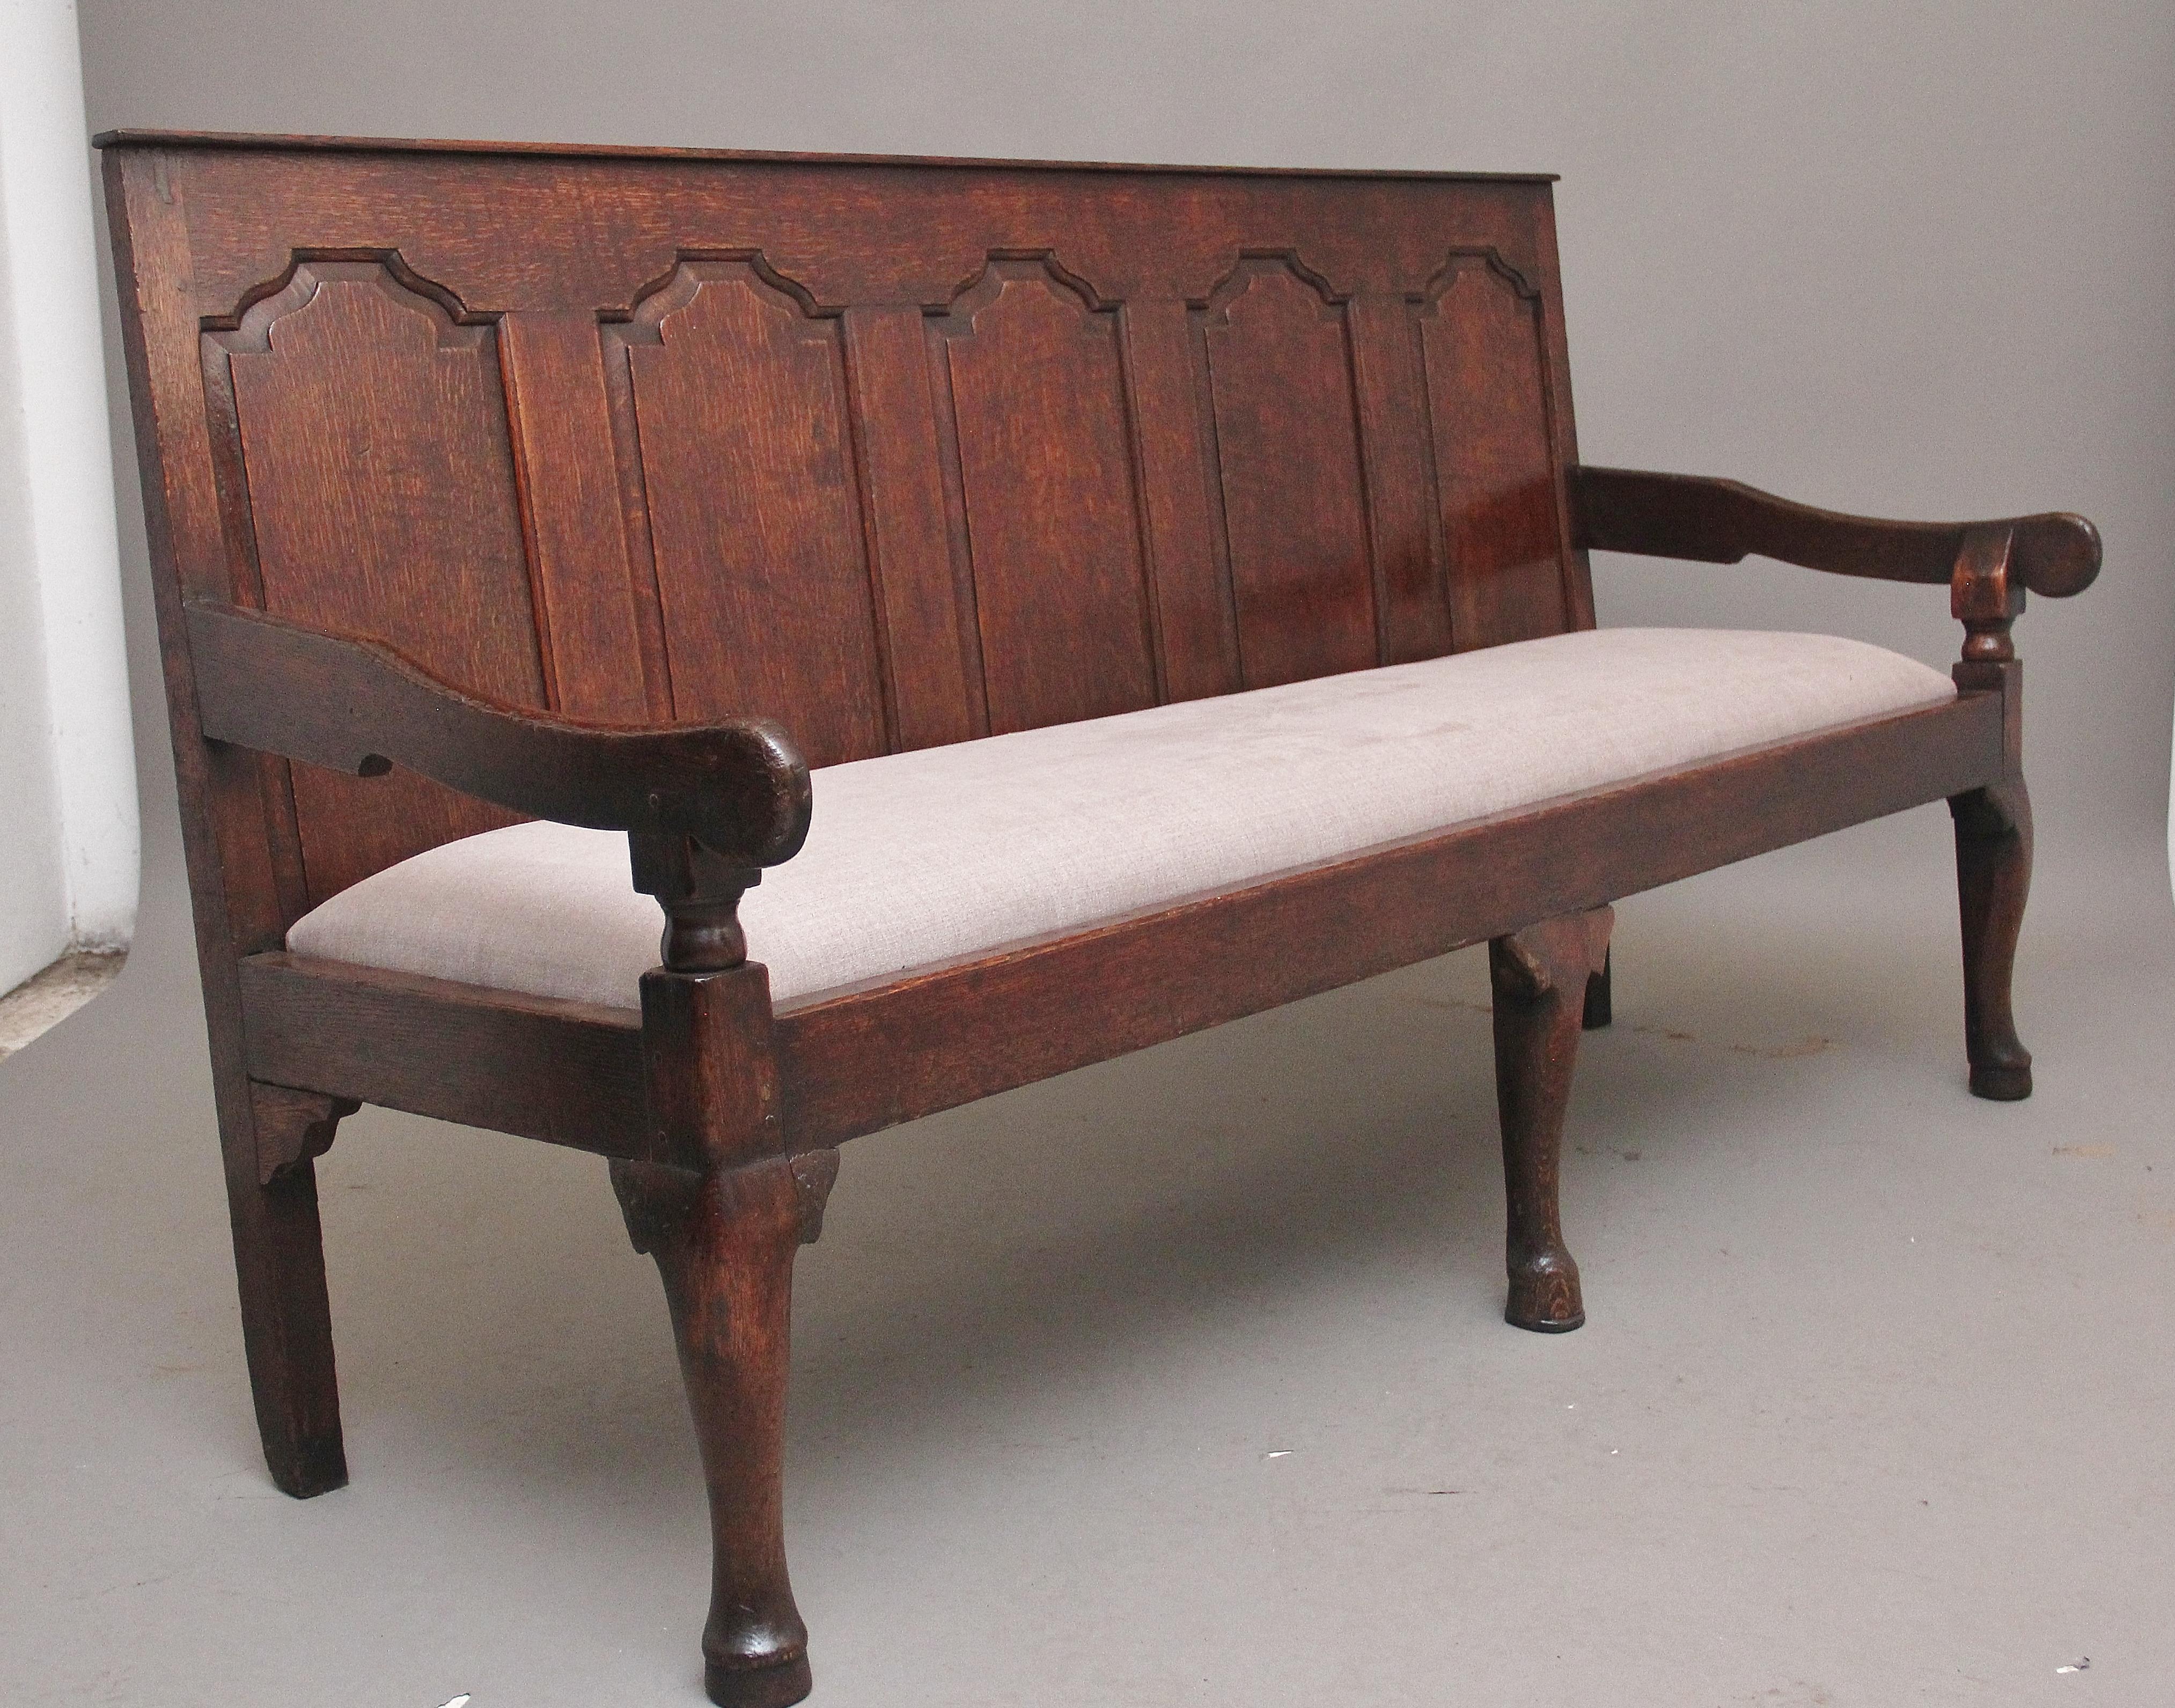 18th century Oak settle / bench the high back with five arched fielded oak panels flanked by down swept arms on turned supports enclosing the recently upholstered grey fabric seat, supported on cabriole front legs and square rear legs. circa 1780.